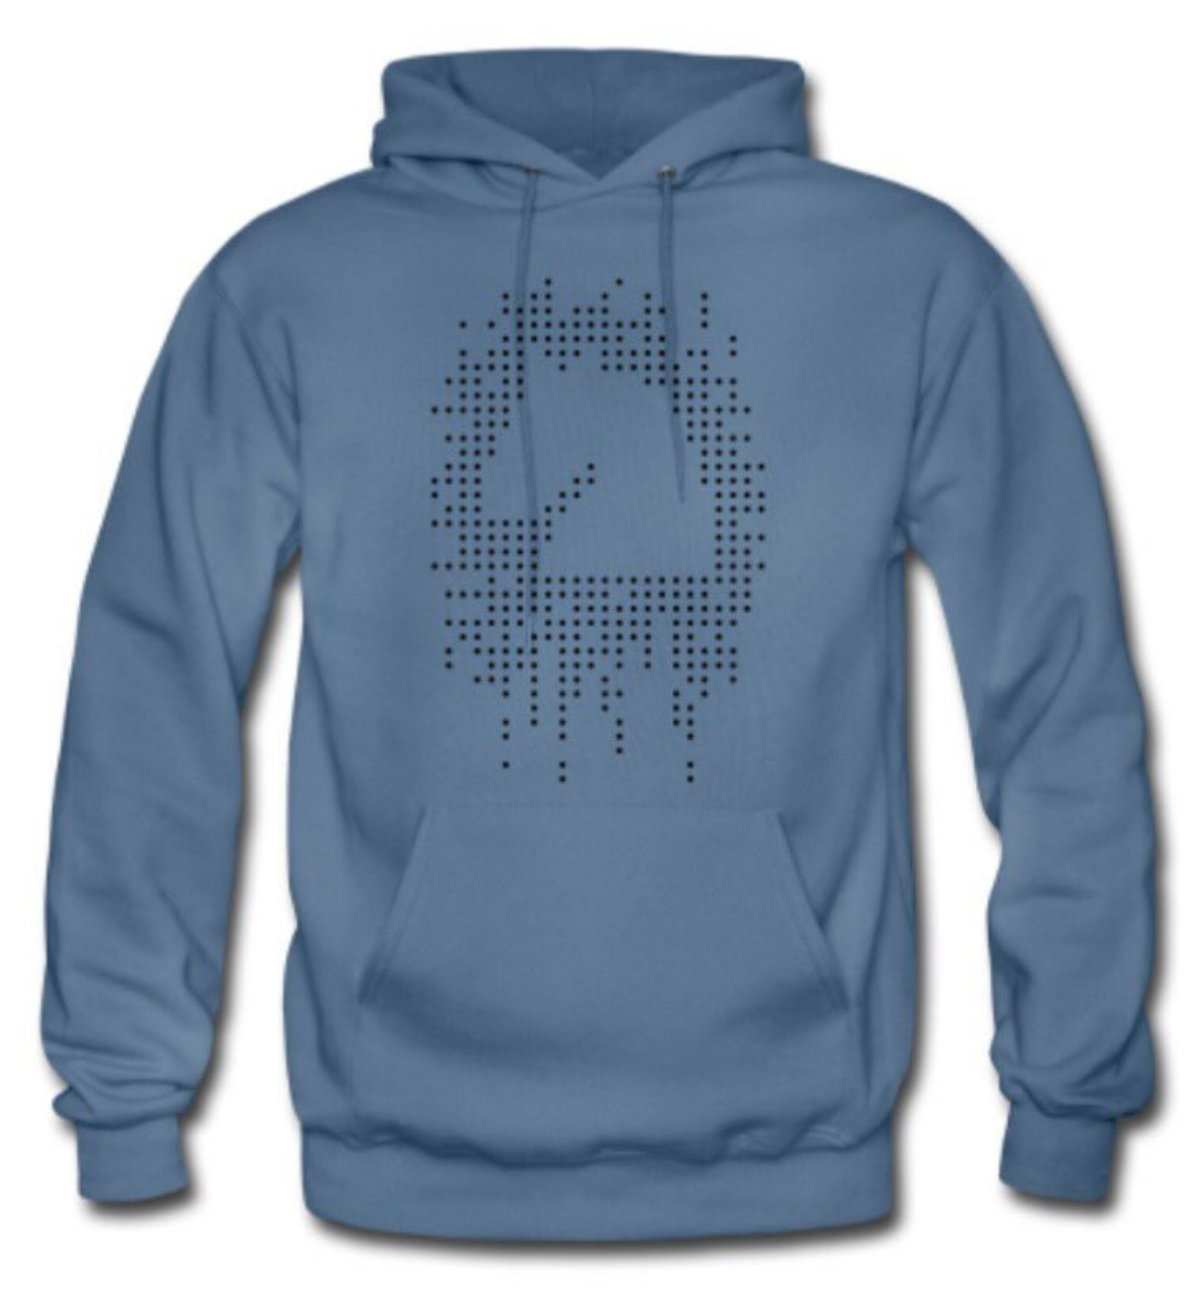 lichess.org swag store